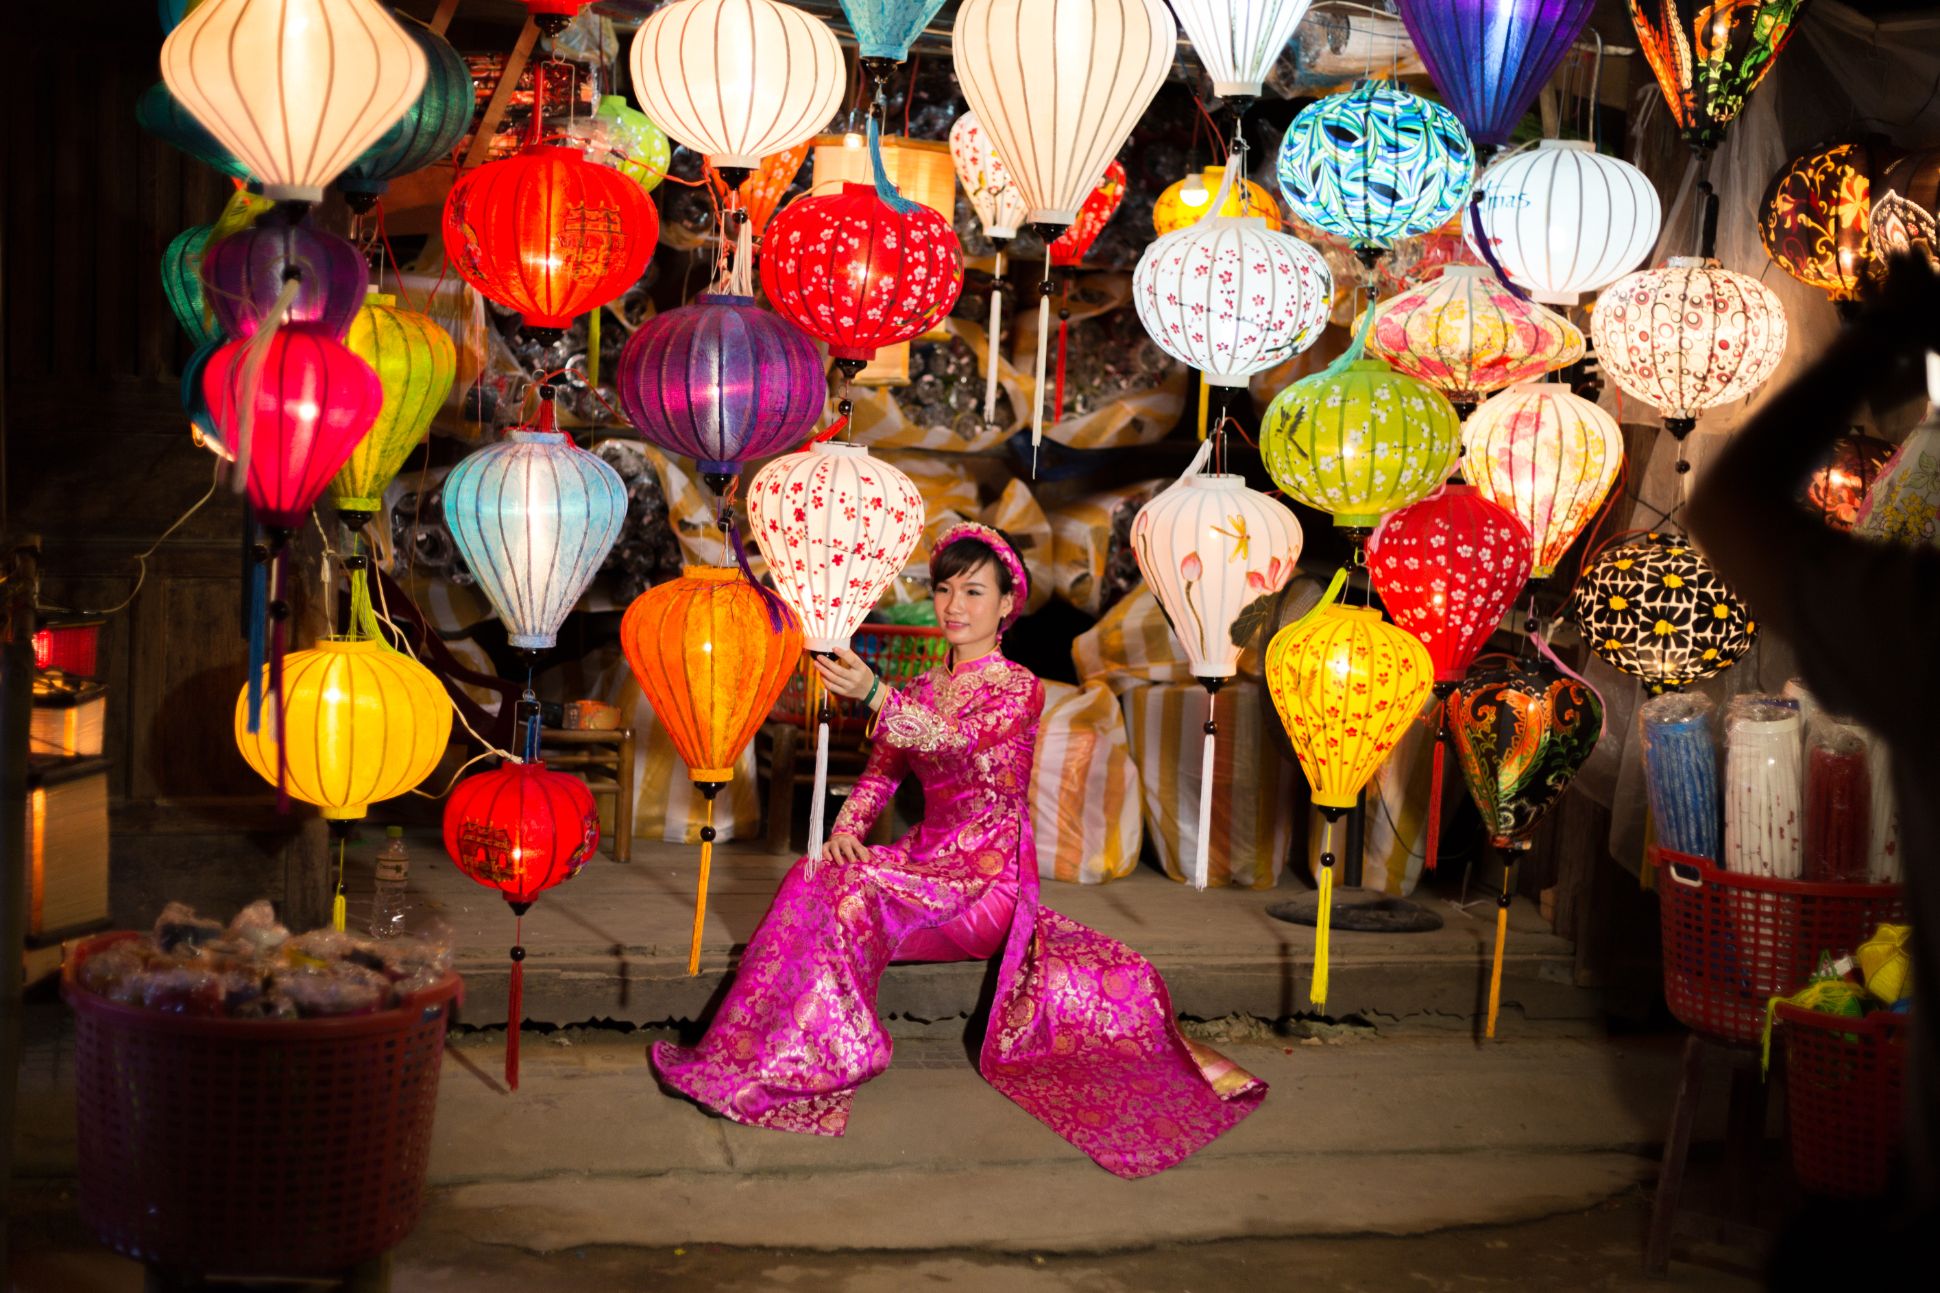 Seated woman surrounded by colorful and patterned lanterns